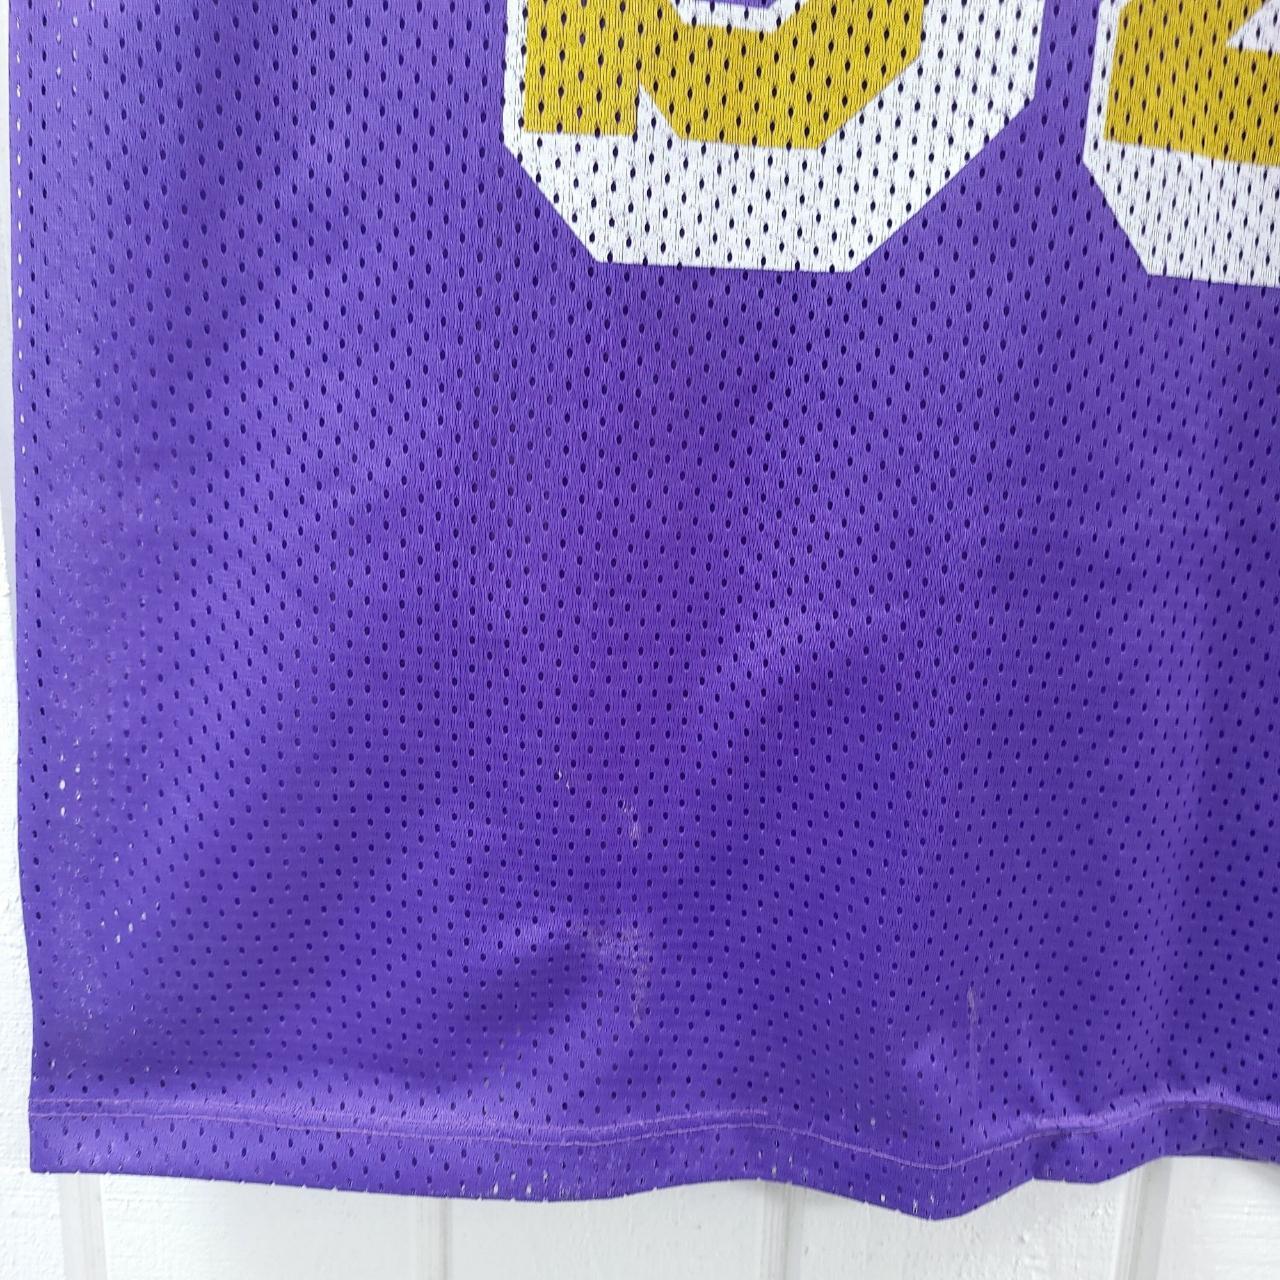 Repop Vintage purple and yellow Lakers jersey shorts - Depop